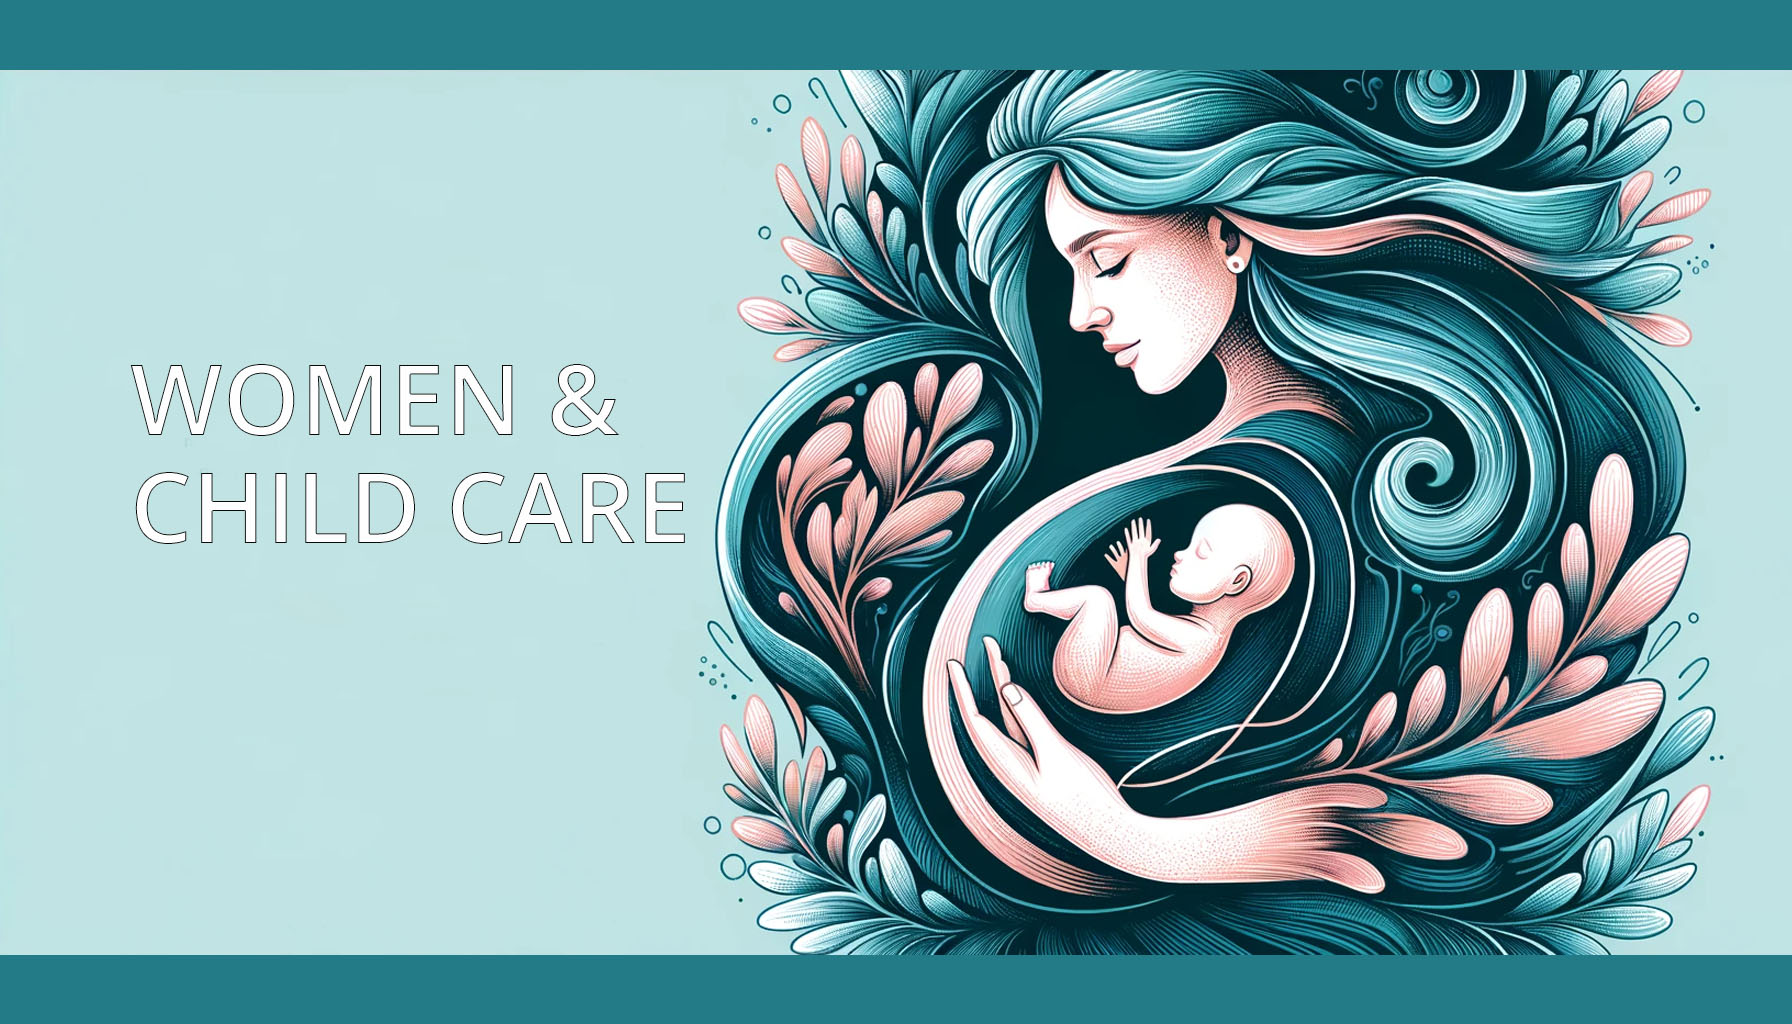 Mother & Child Care in Belenus Hospital